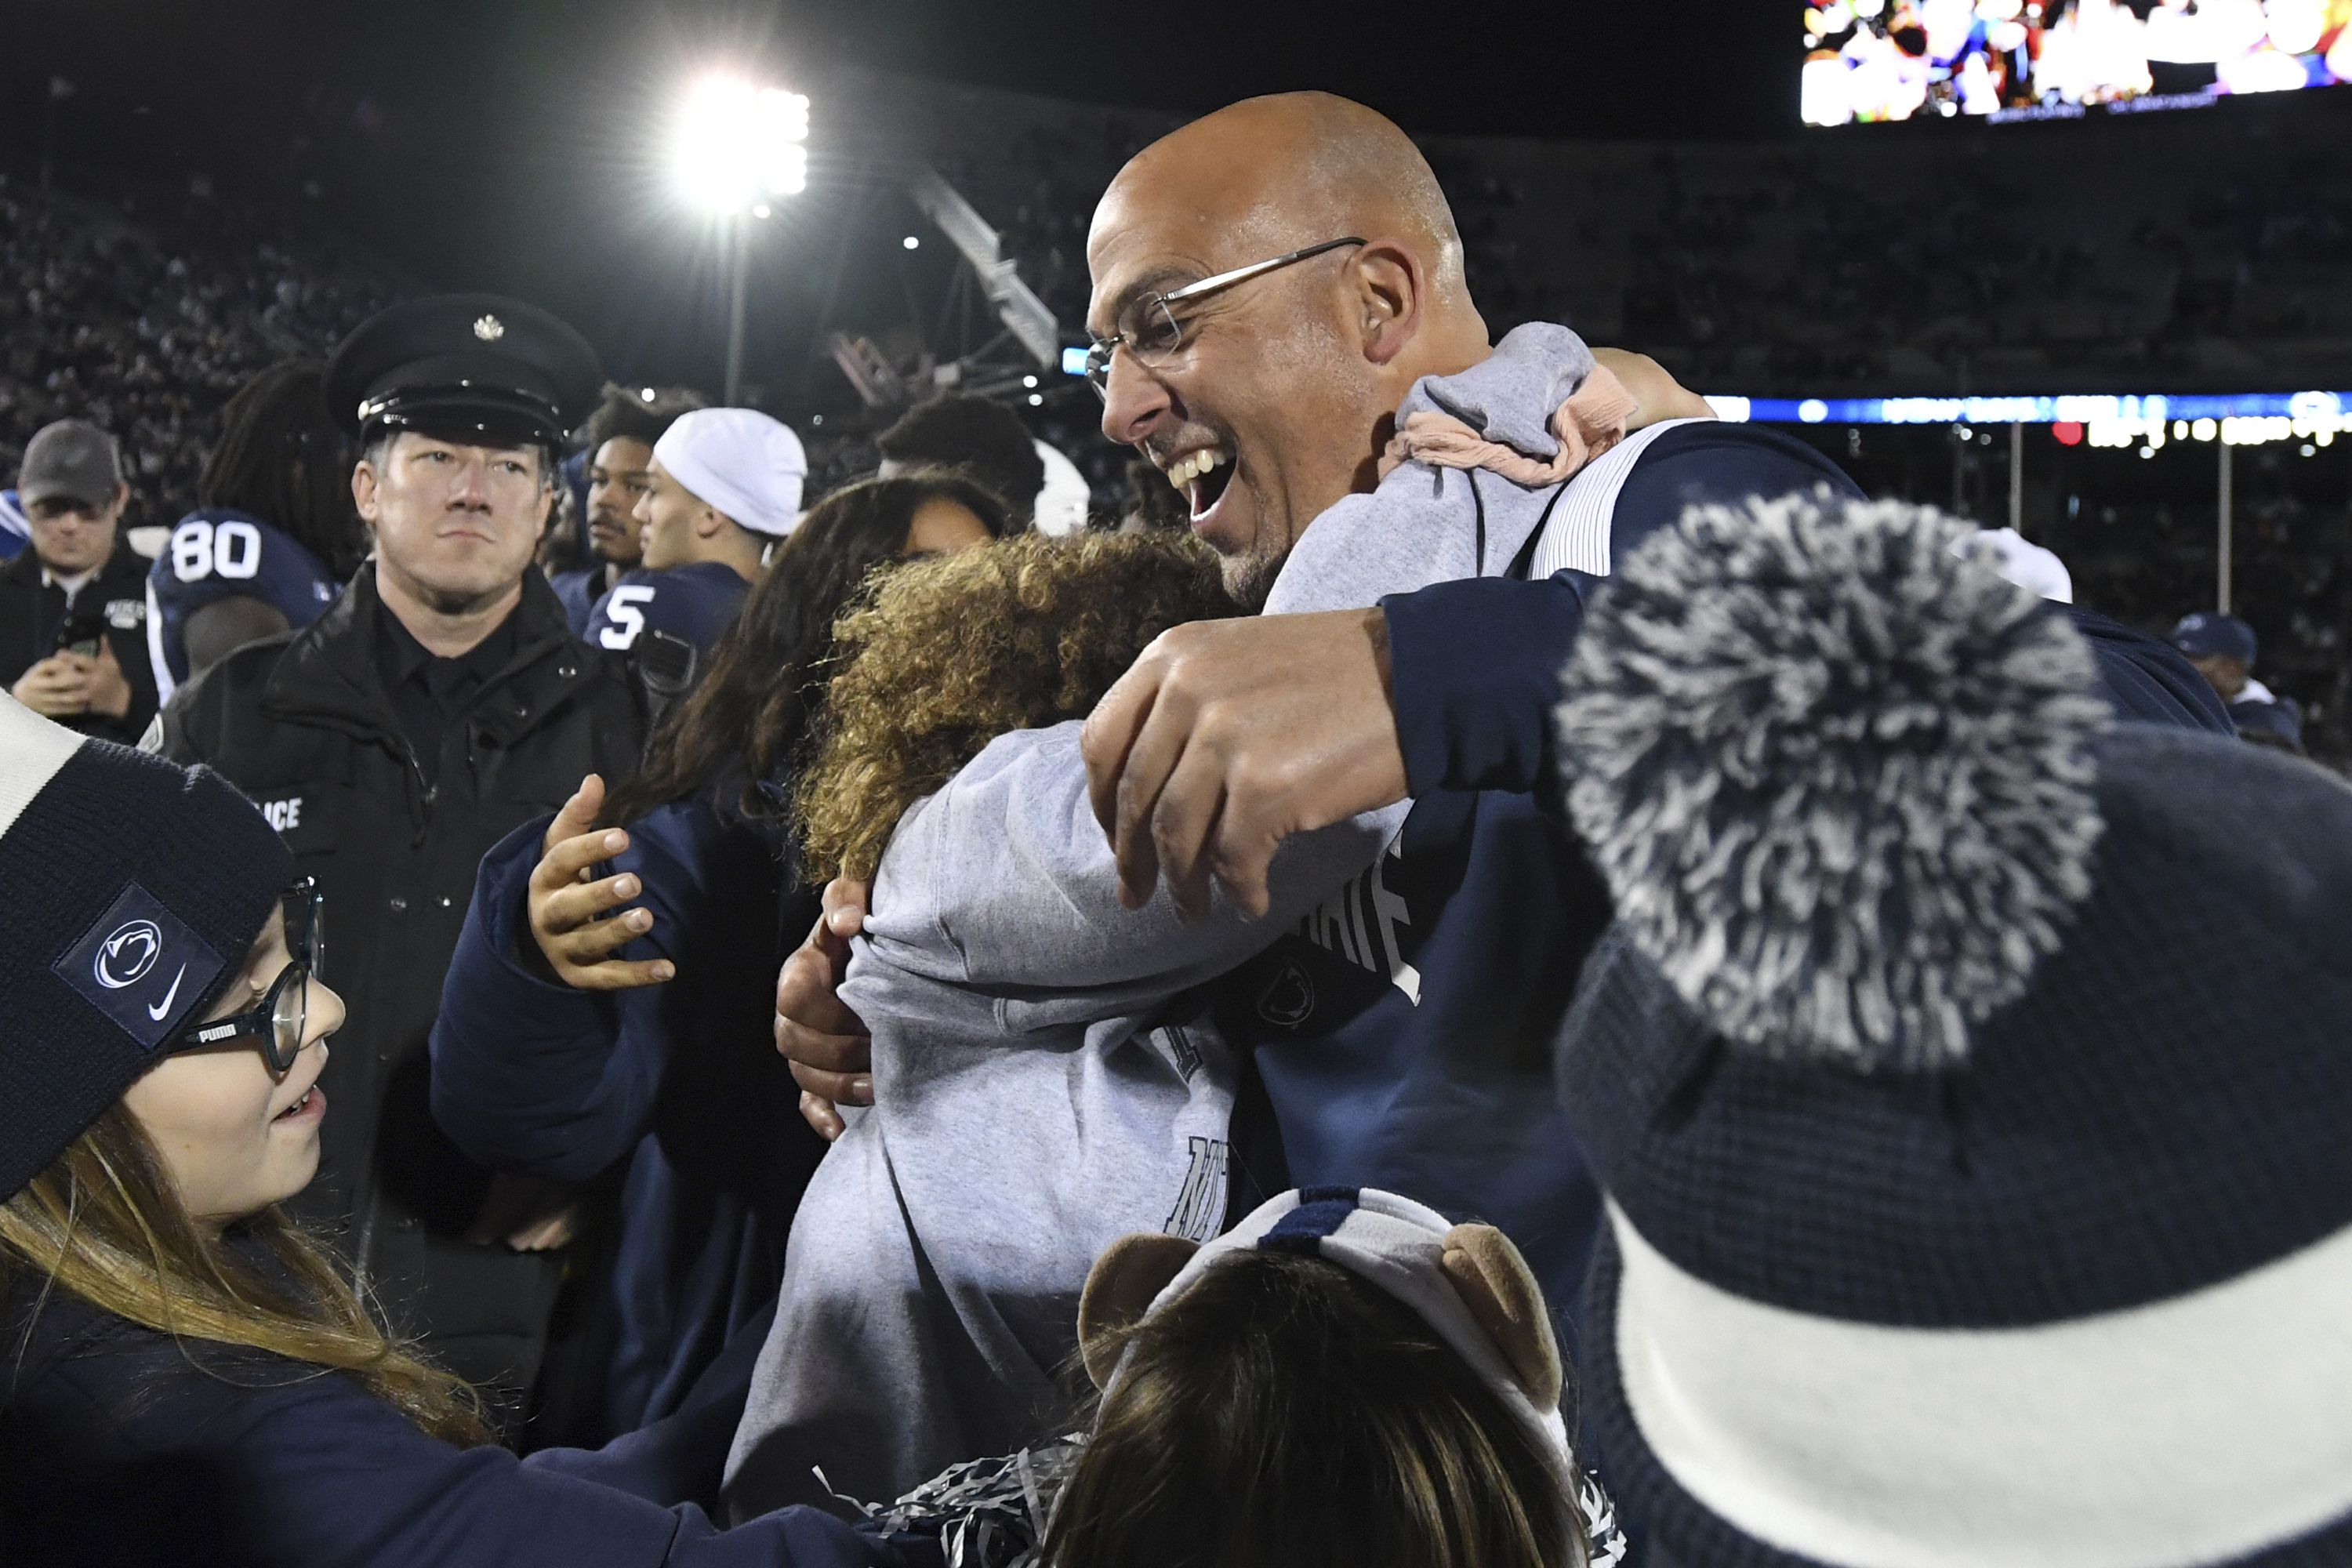 (Barry Reeger | AP) Penn State head coach James Franklin celebrates with his daughter Addy following a 35-16 victory over Michigan State during an NCAA college football game, Saturday, Nov. 26, 2022, in State College, Pa.